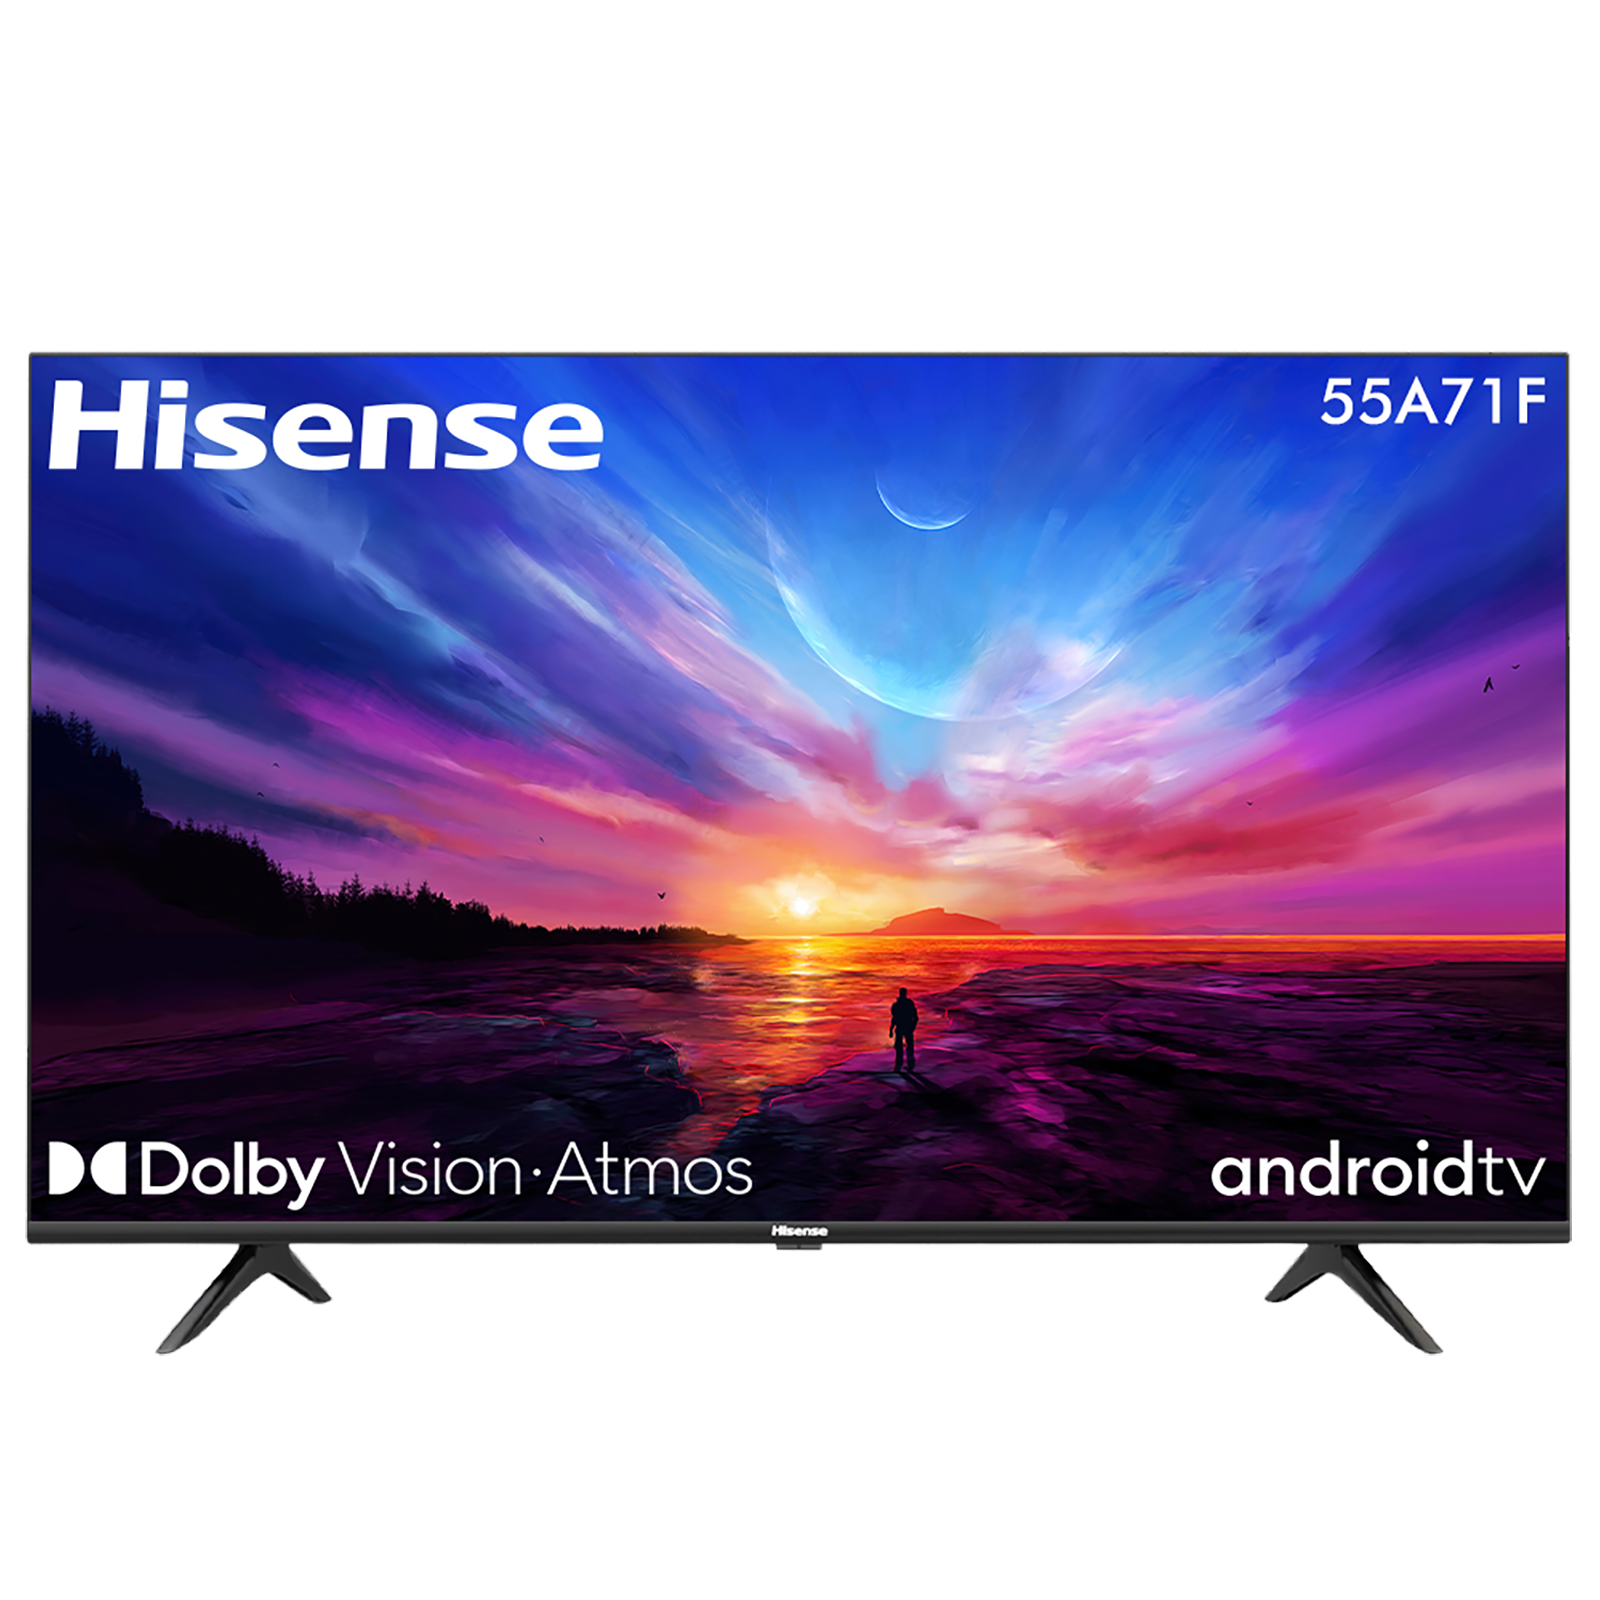 Hisense A71F 139 cm (55 inch) 4K Ultra HD LED Android TV with Google Assistant (2020 model)_1